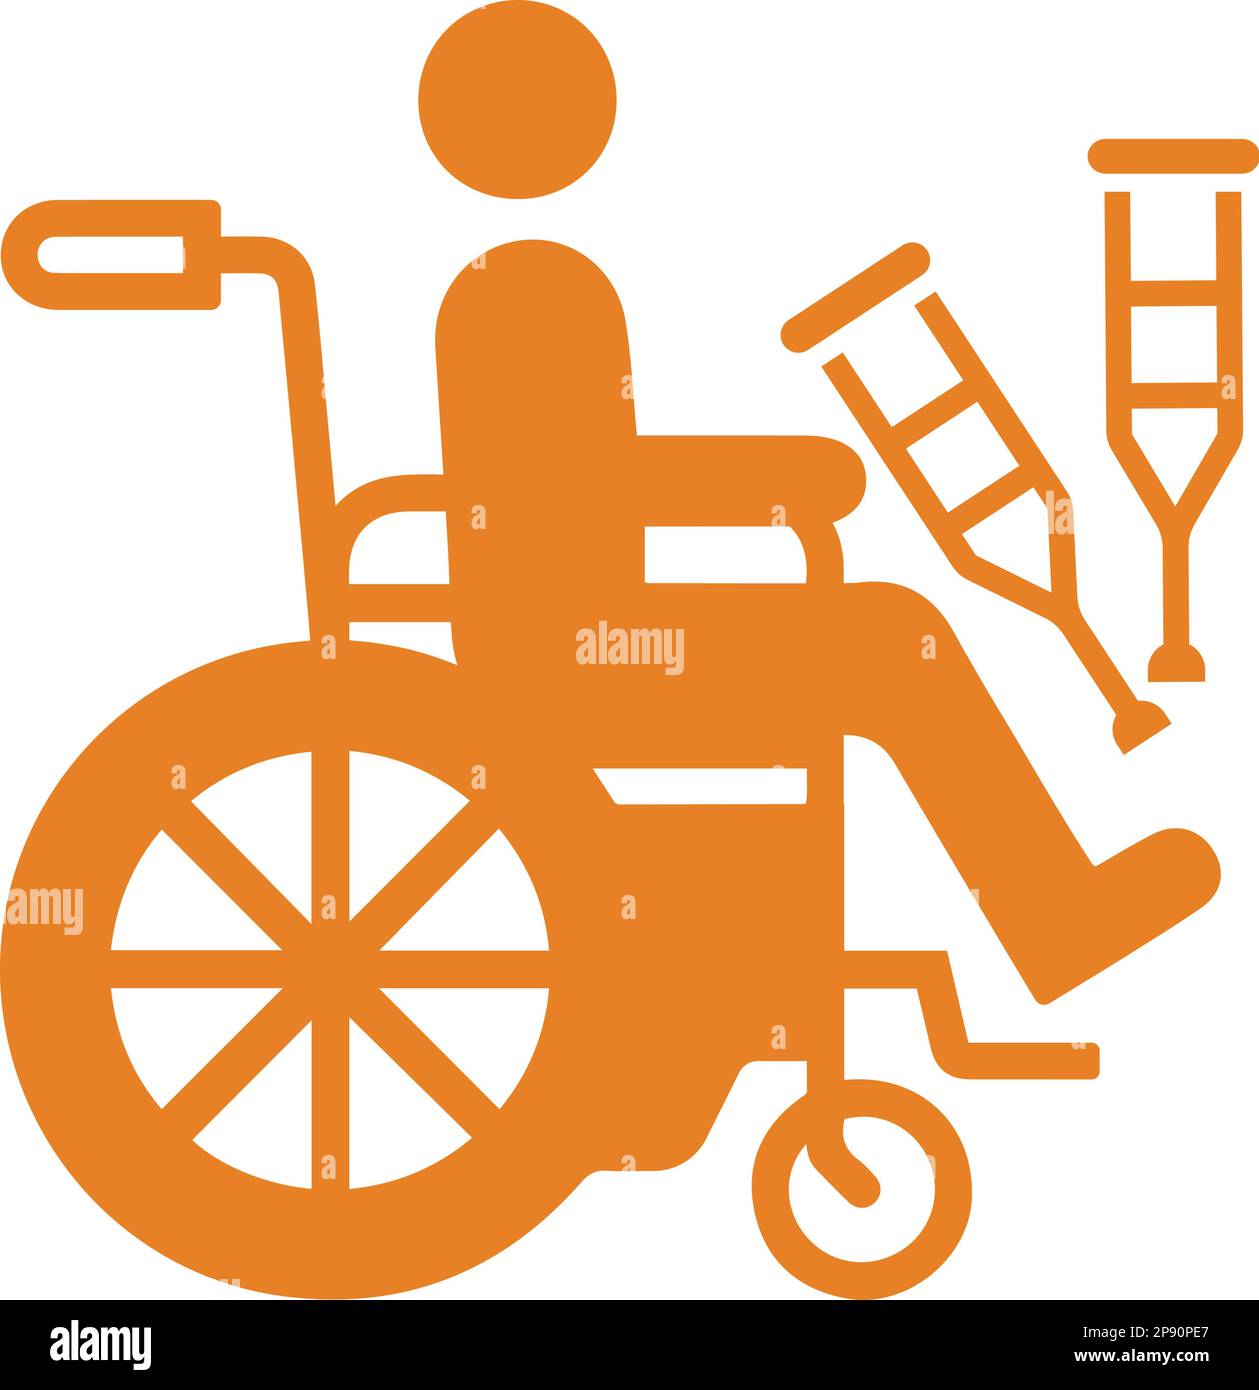 Crutches and wheelchair icon. Perfect use for print media, web, stock images, commercial use or any kind of design project. Stock Vector